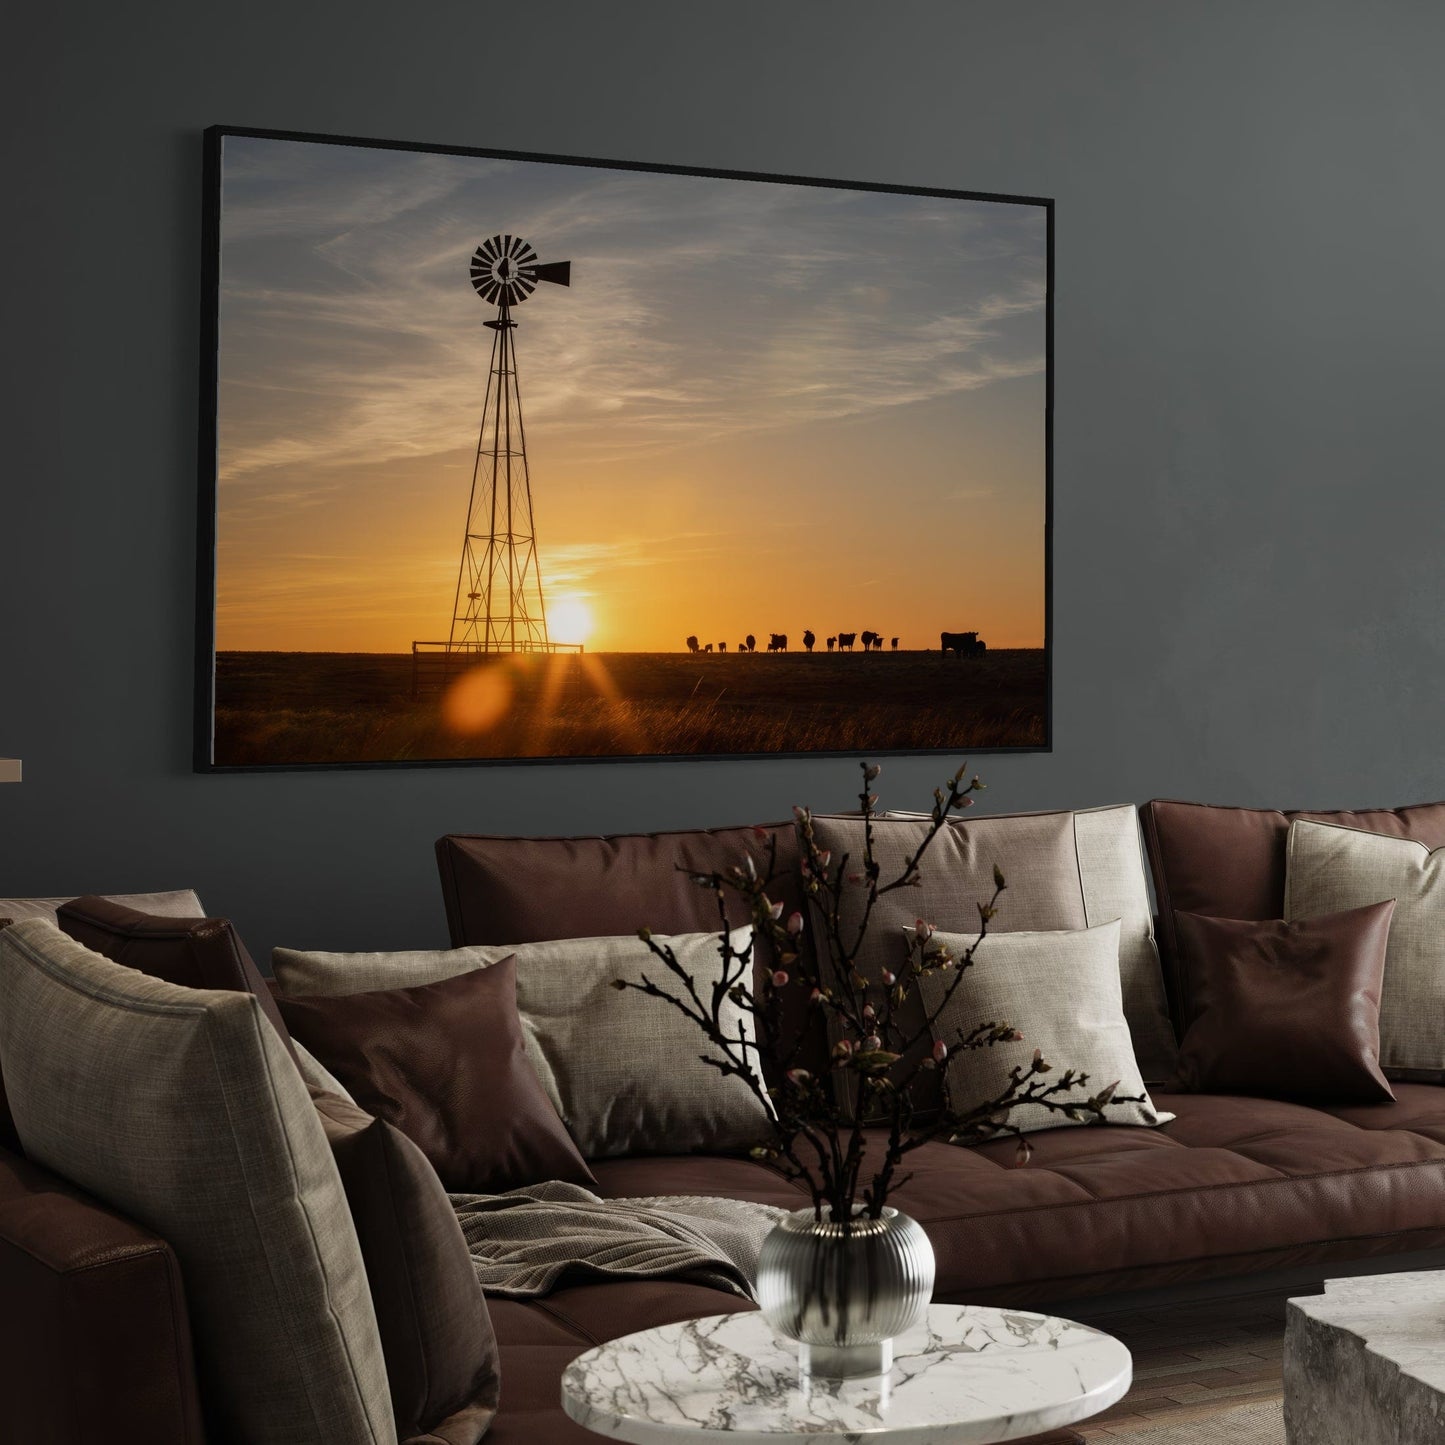 Old Windmill at Sunset with Angus Cattle Wall Art Teri James Photography